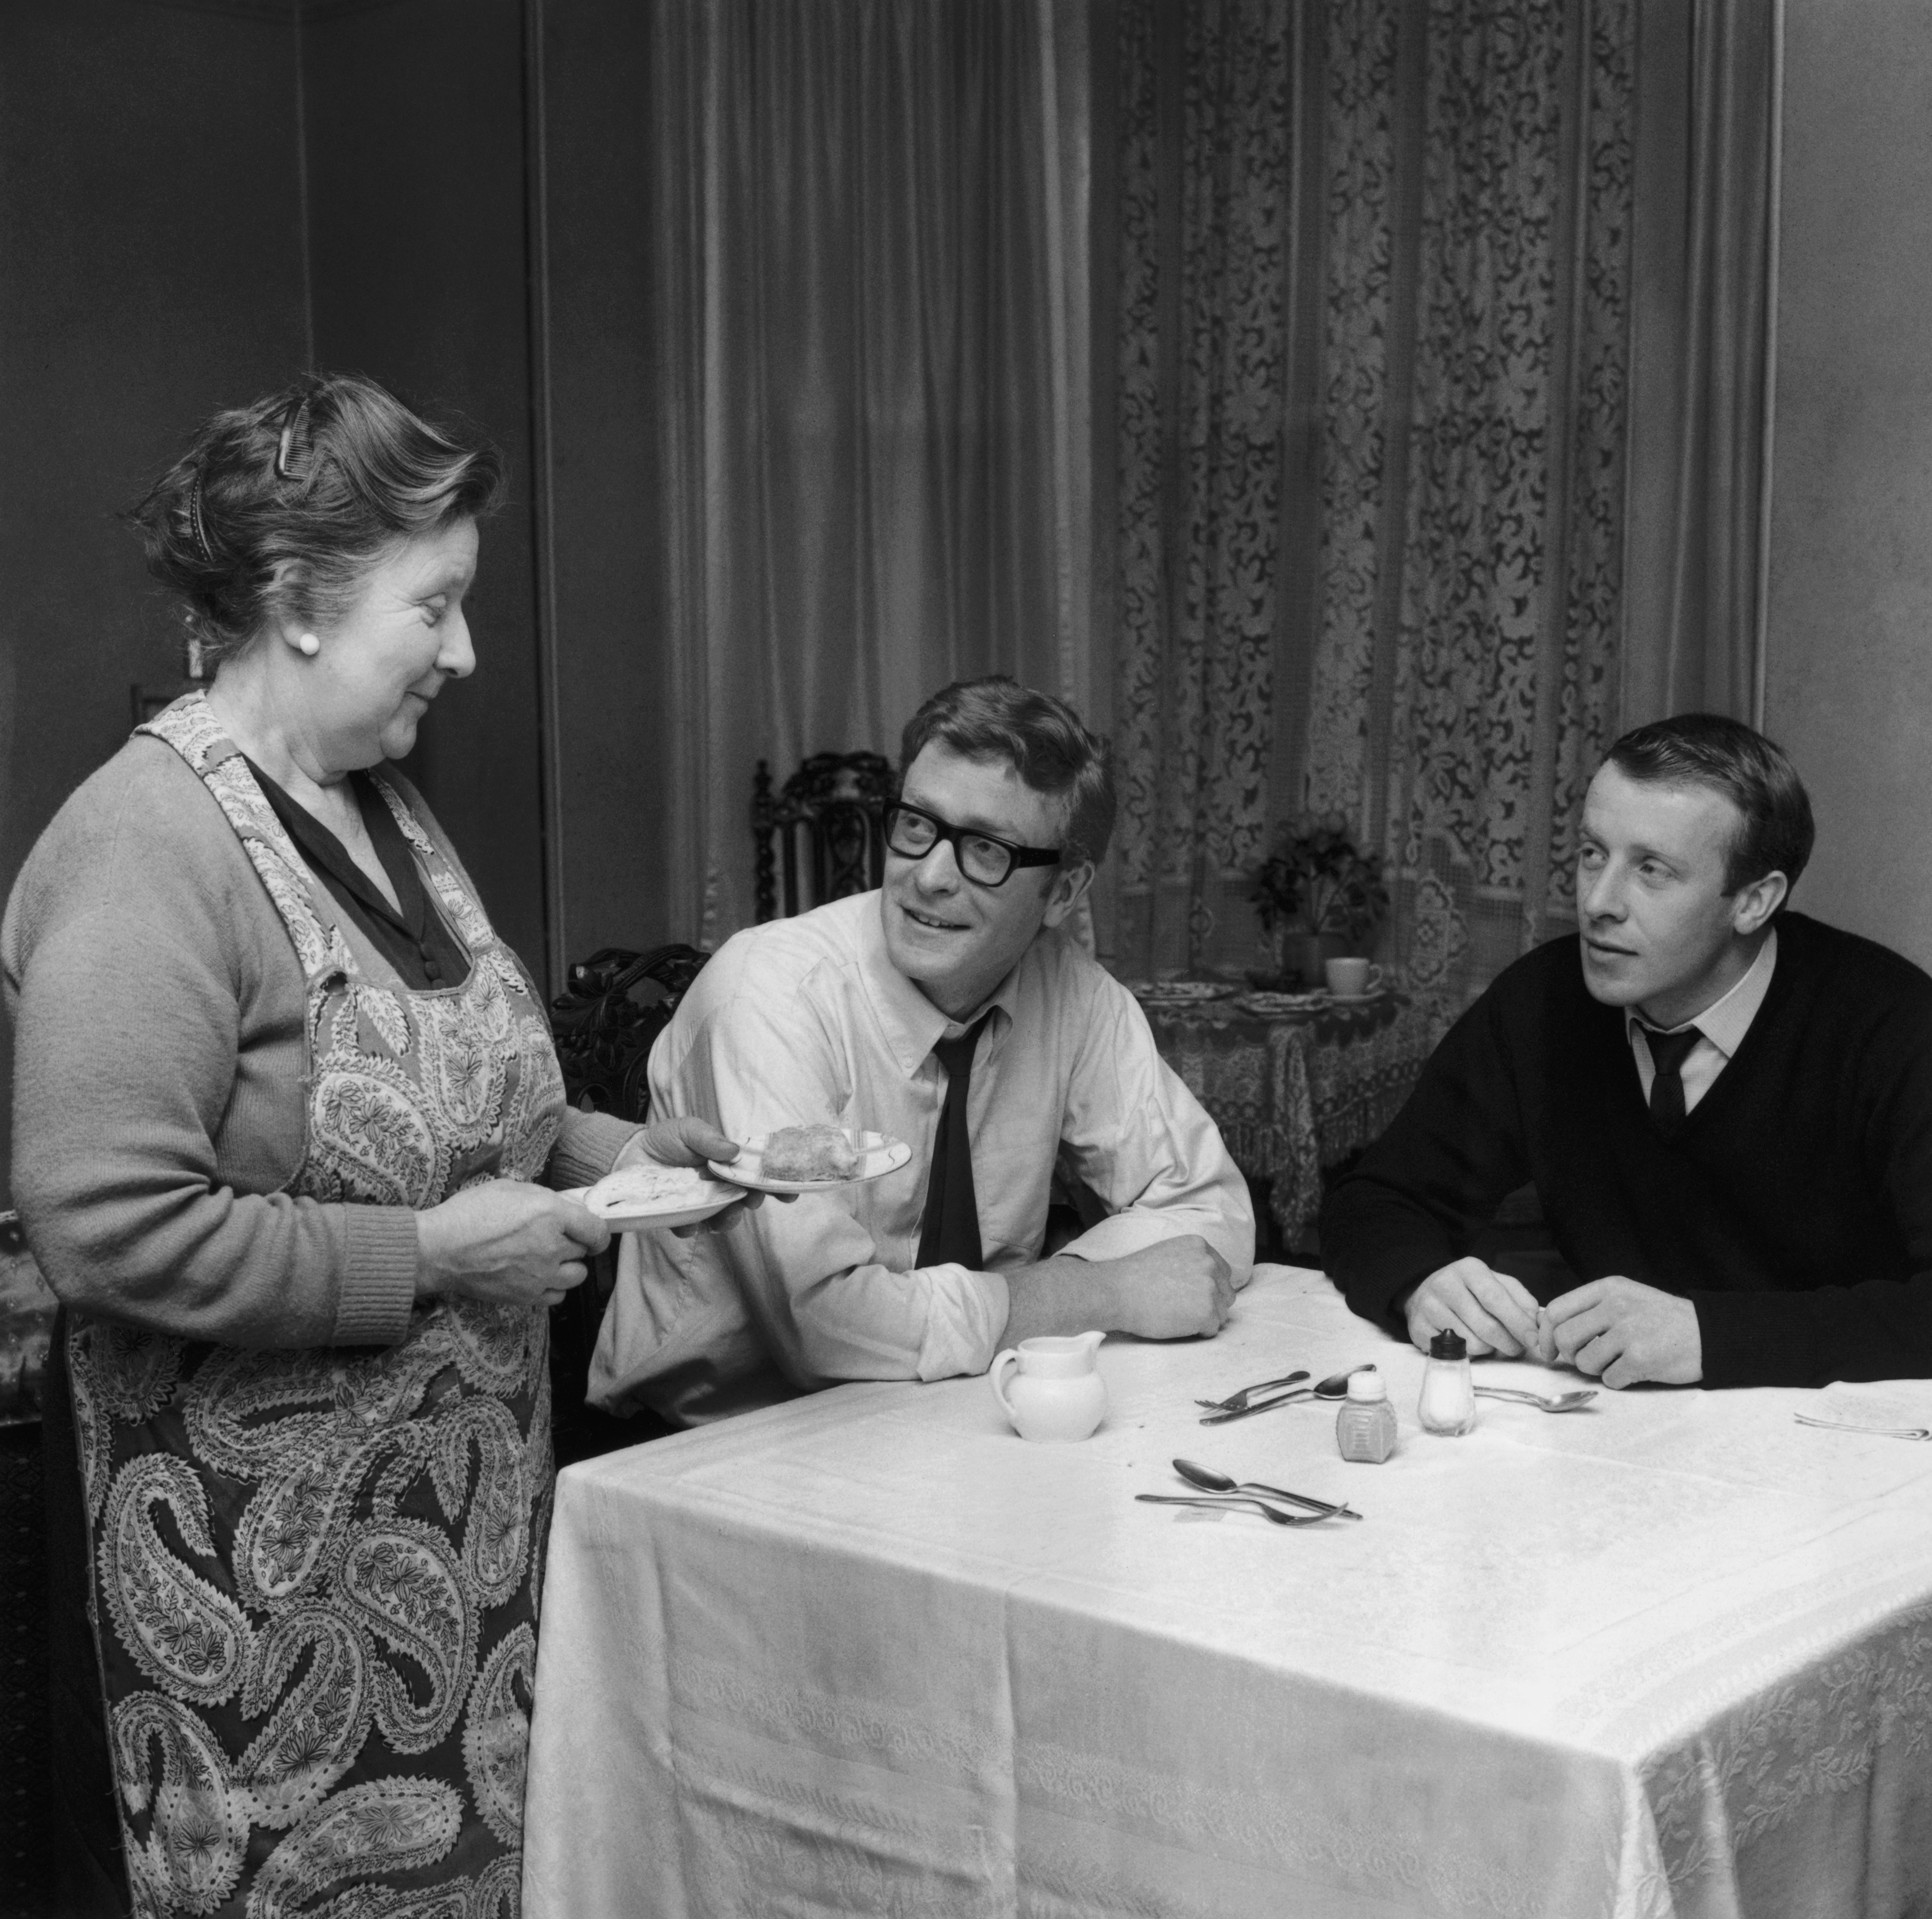 Ellen Burchell, Michael Caine and Stanley Caine on February 3, 1964  | Source: Getty Images